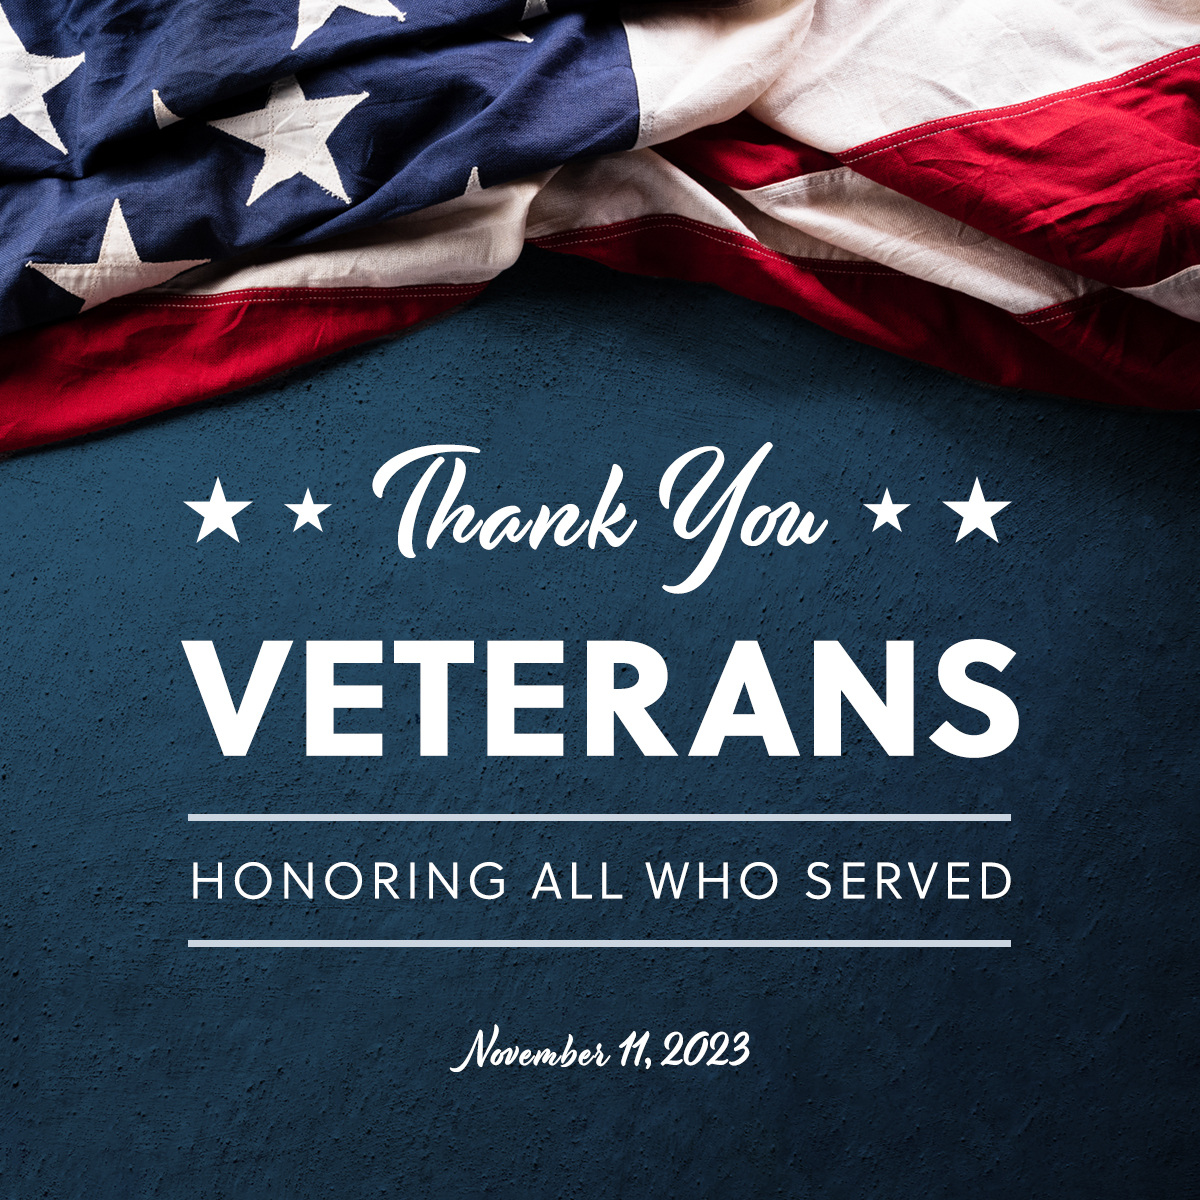 Join us in thanking our heroes this Veterans Day!

We are forever grateful for the tremendous sacrifice of all those who have served and their loved ones. 

#UtilityIndustry #SoftwareSolutions #UtilityDesigners #ElectricUtilities #VeteranEngineers #VeteransInSTEM #VeteransDay